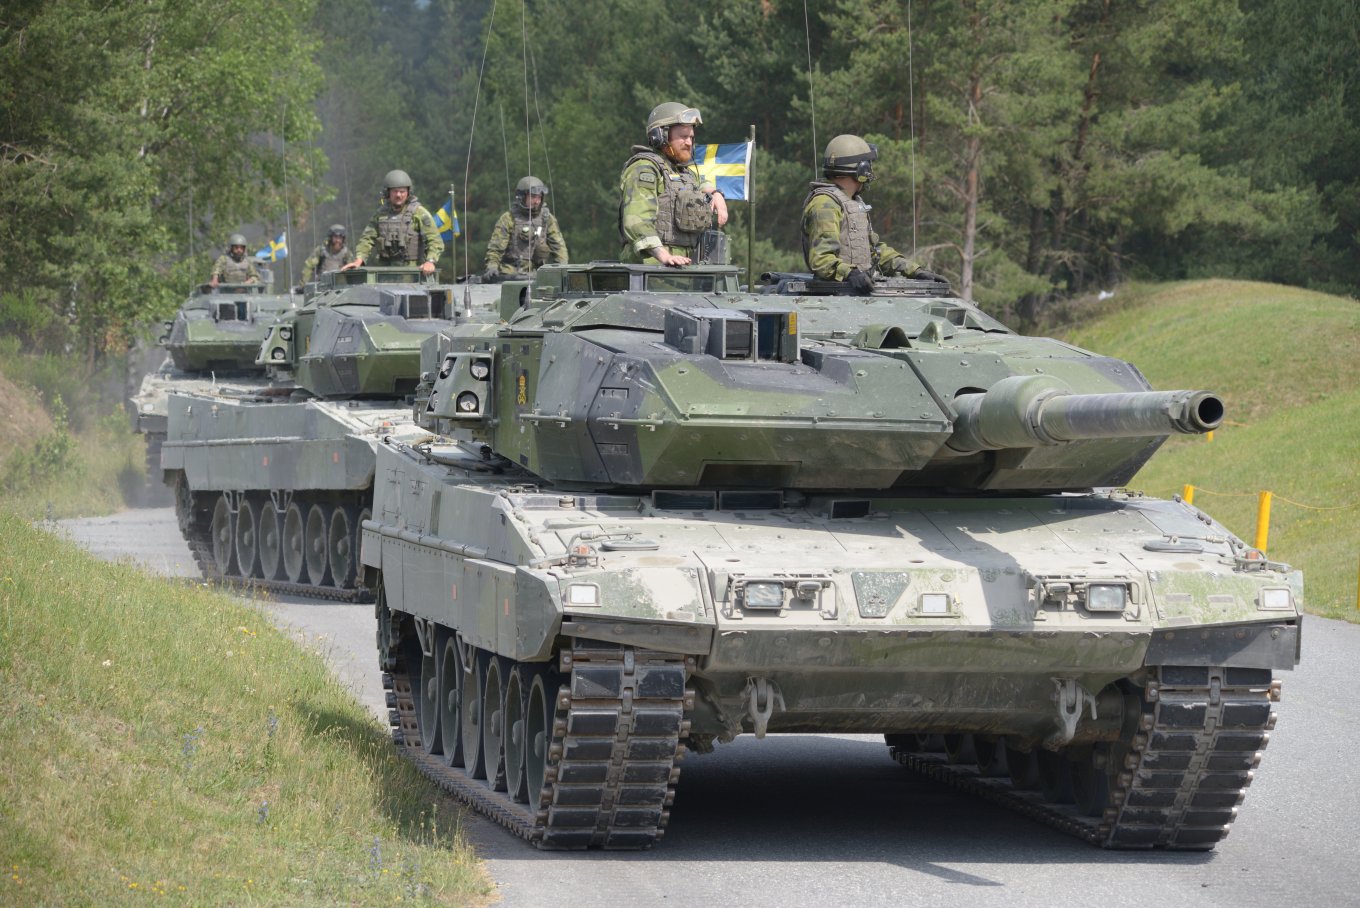 Leopard 2 From Finland And Other Allies For Ukraine: How Real Their Transfer Is, Defense Express, war in Ukraine, Russian-Ukrainian war